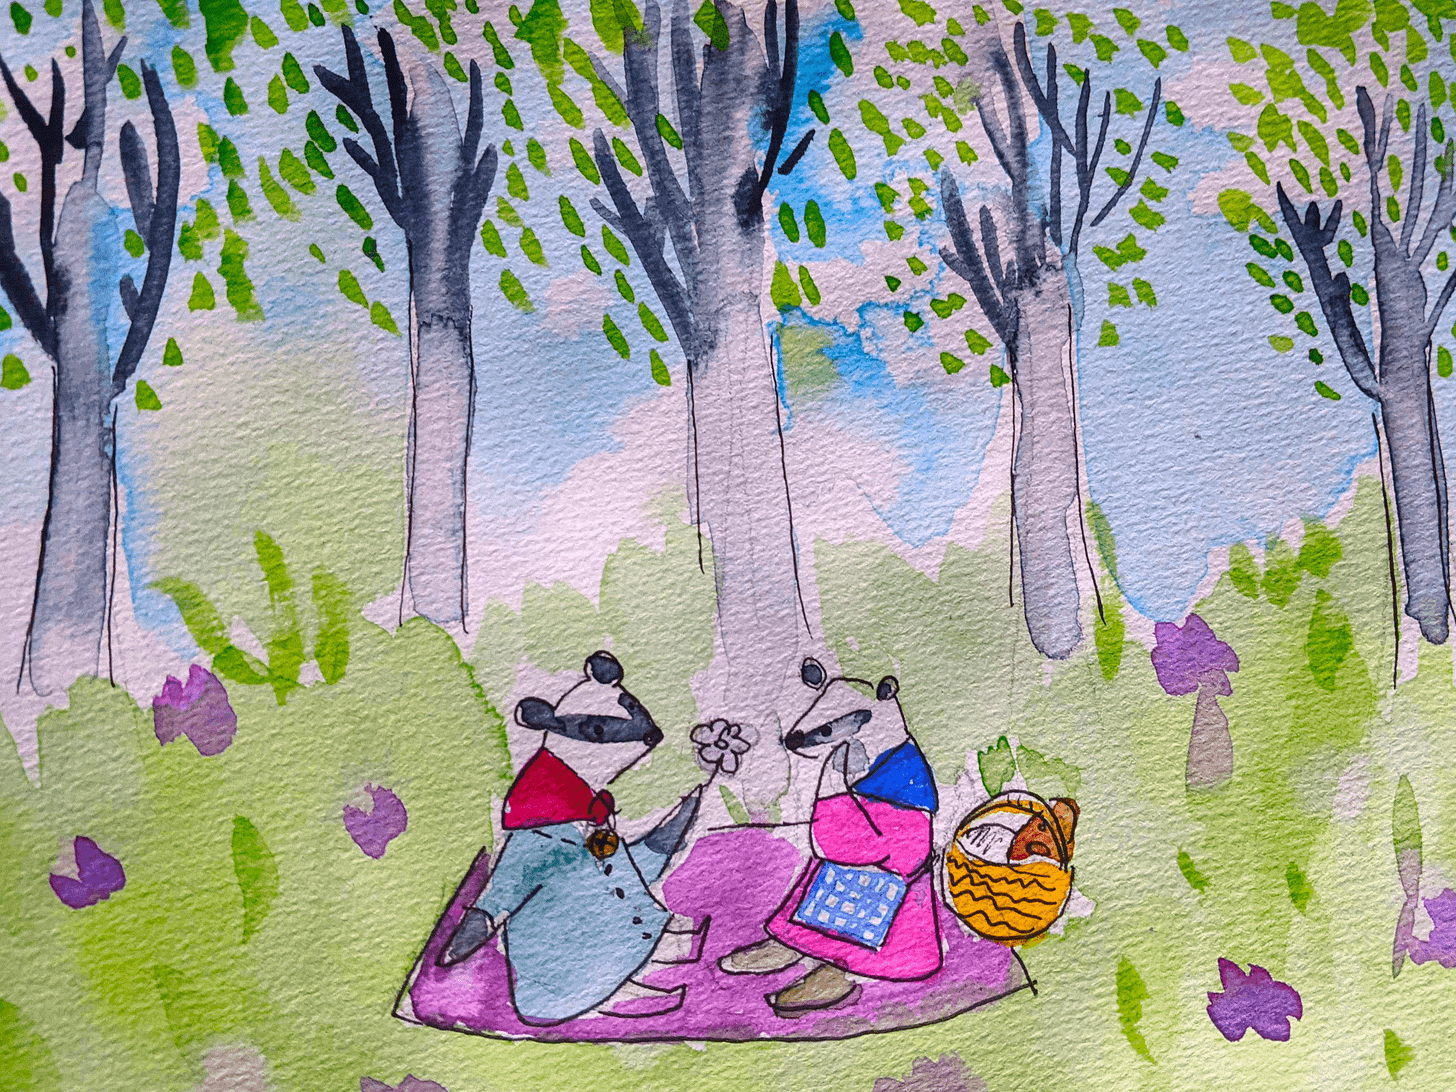 Two young badgers having a picnic in a spring woodland clearing.